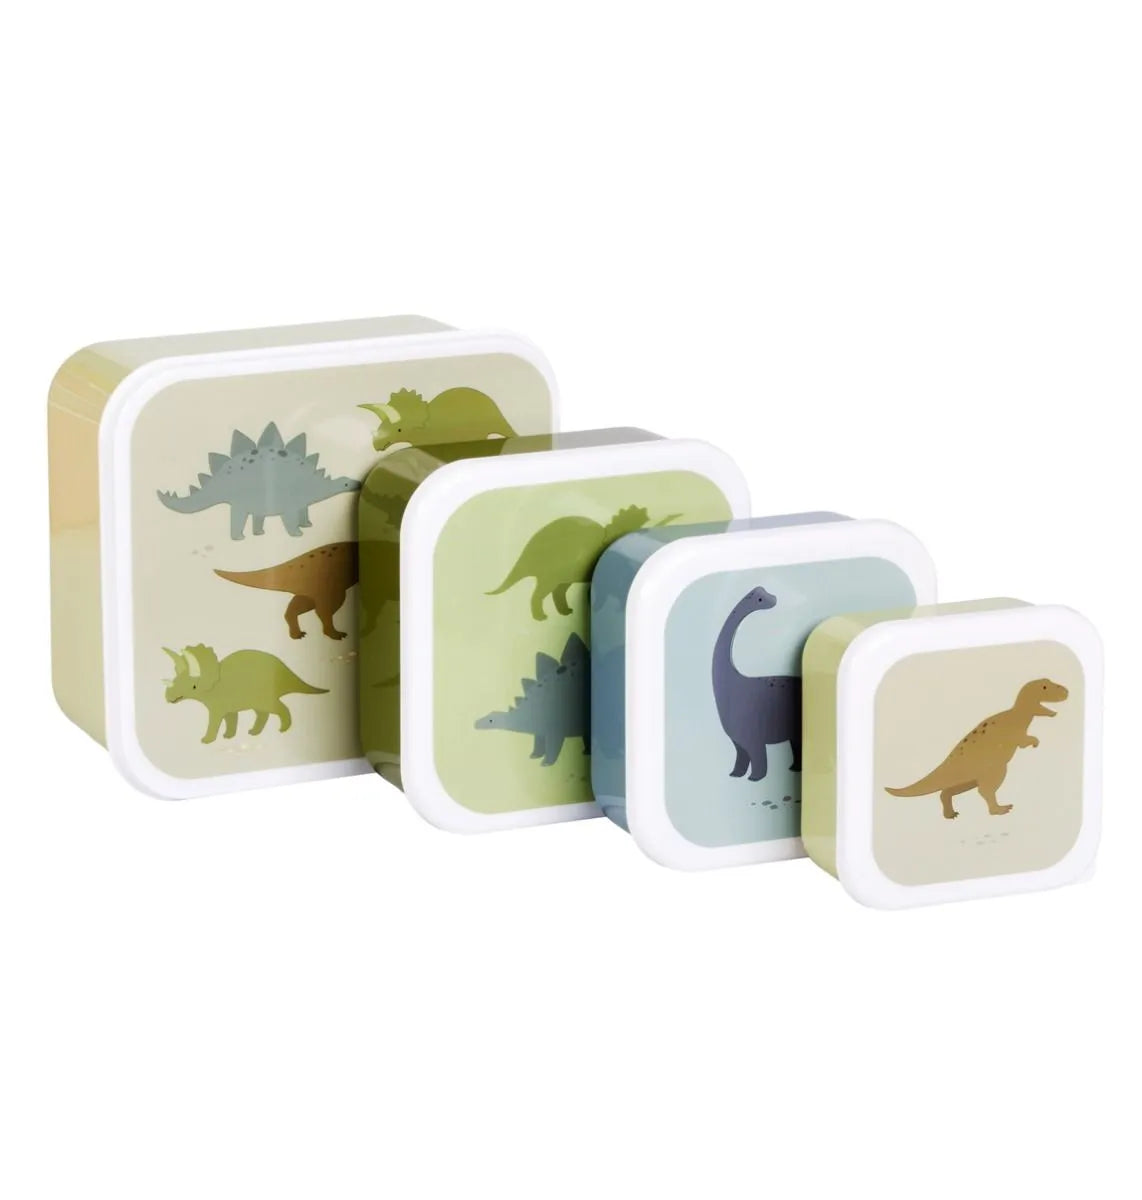 A LITTLE LOVELY COMPANY - Lunch & snack box set -  Dinosaurs